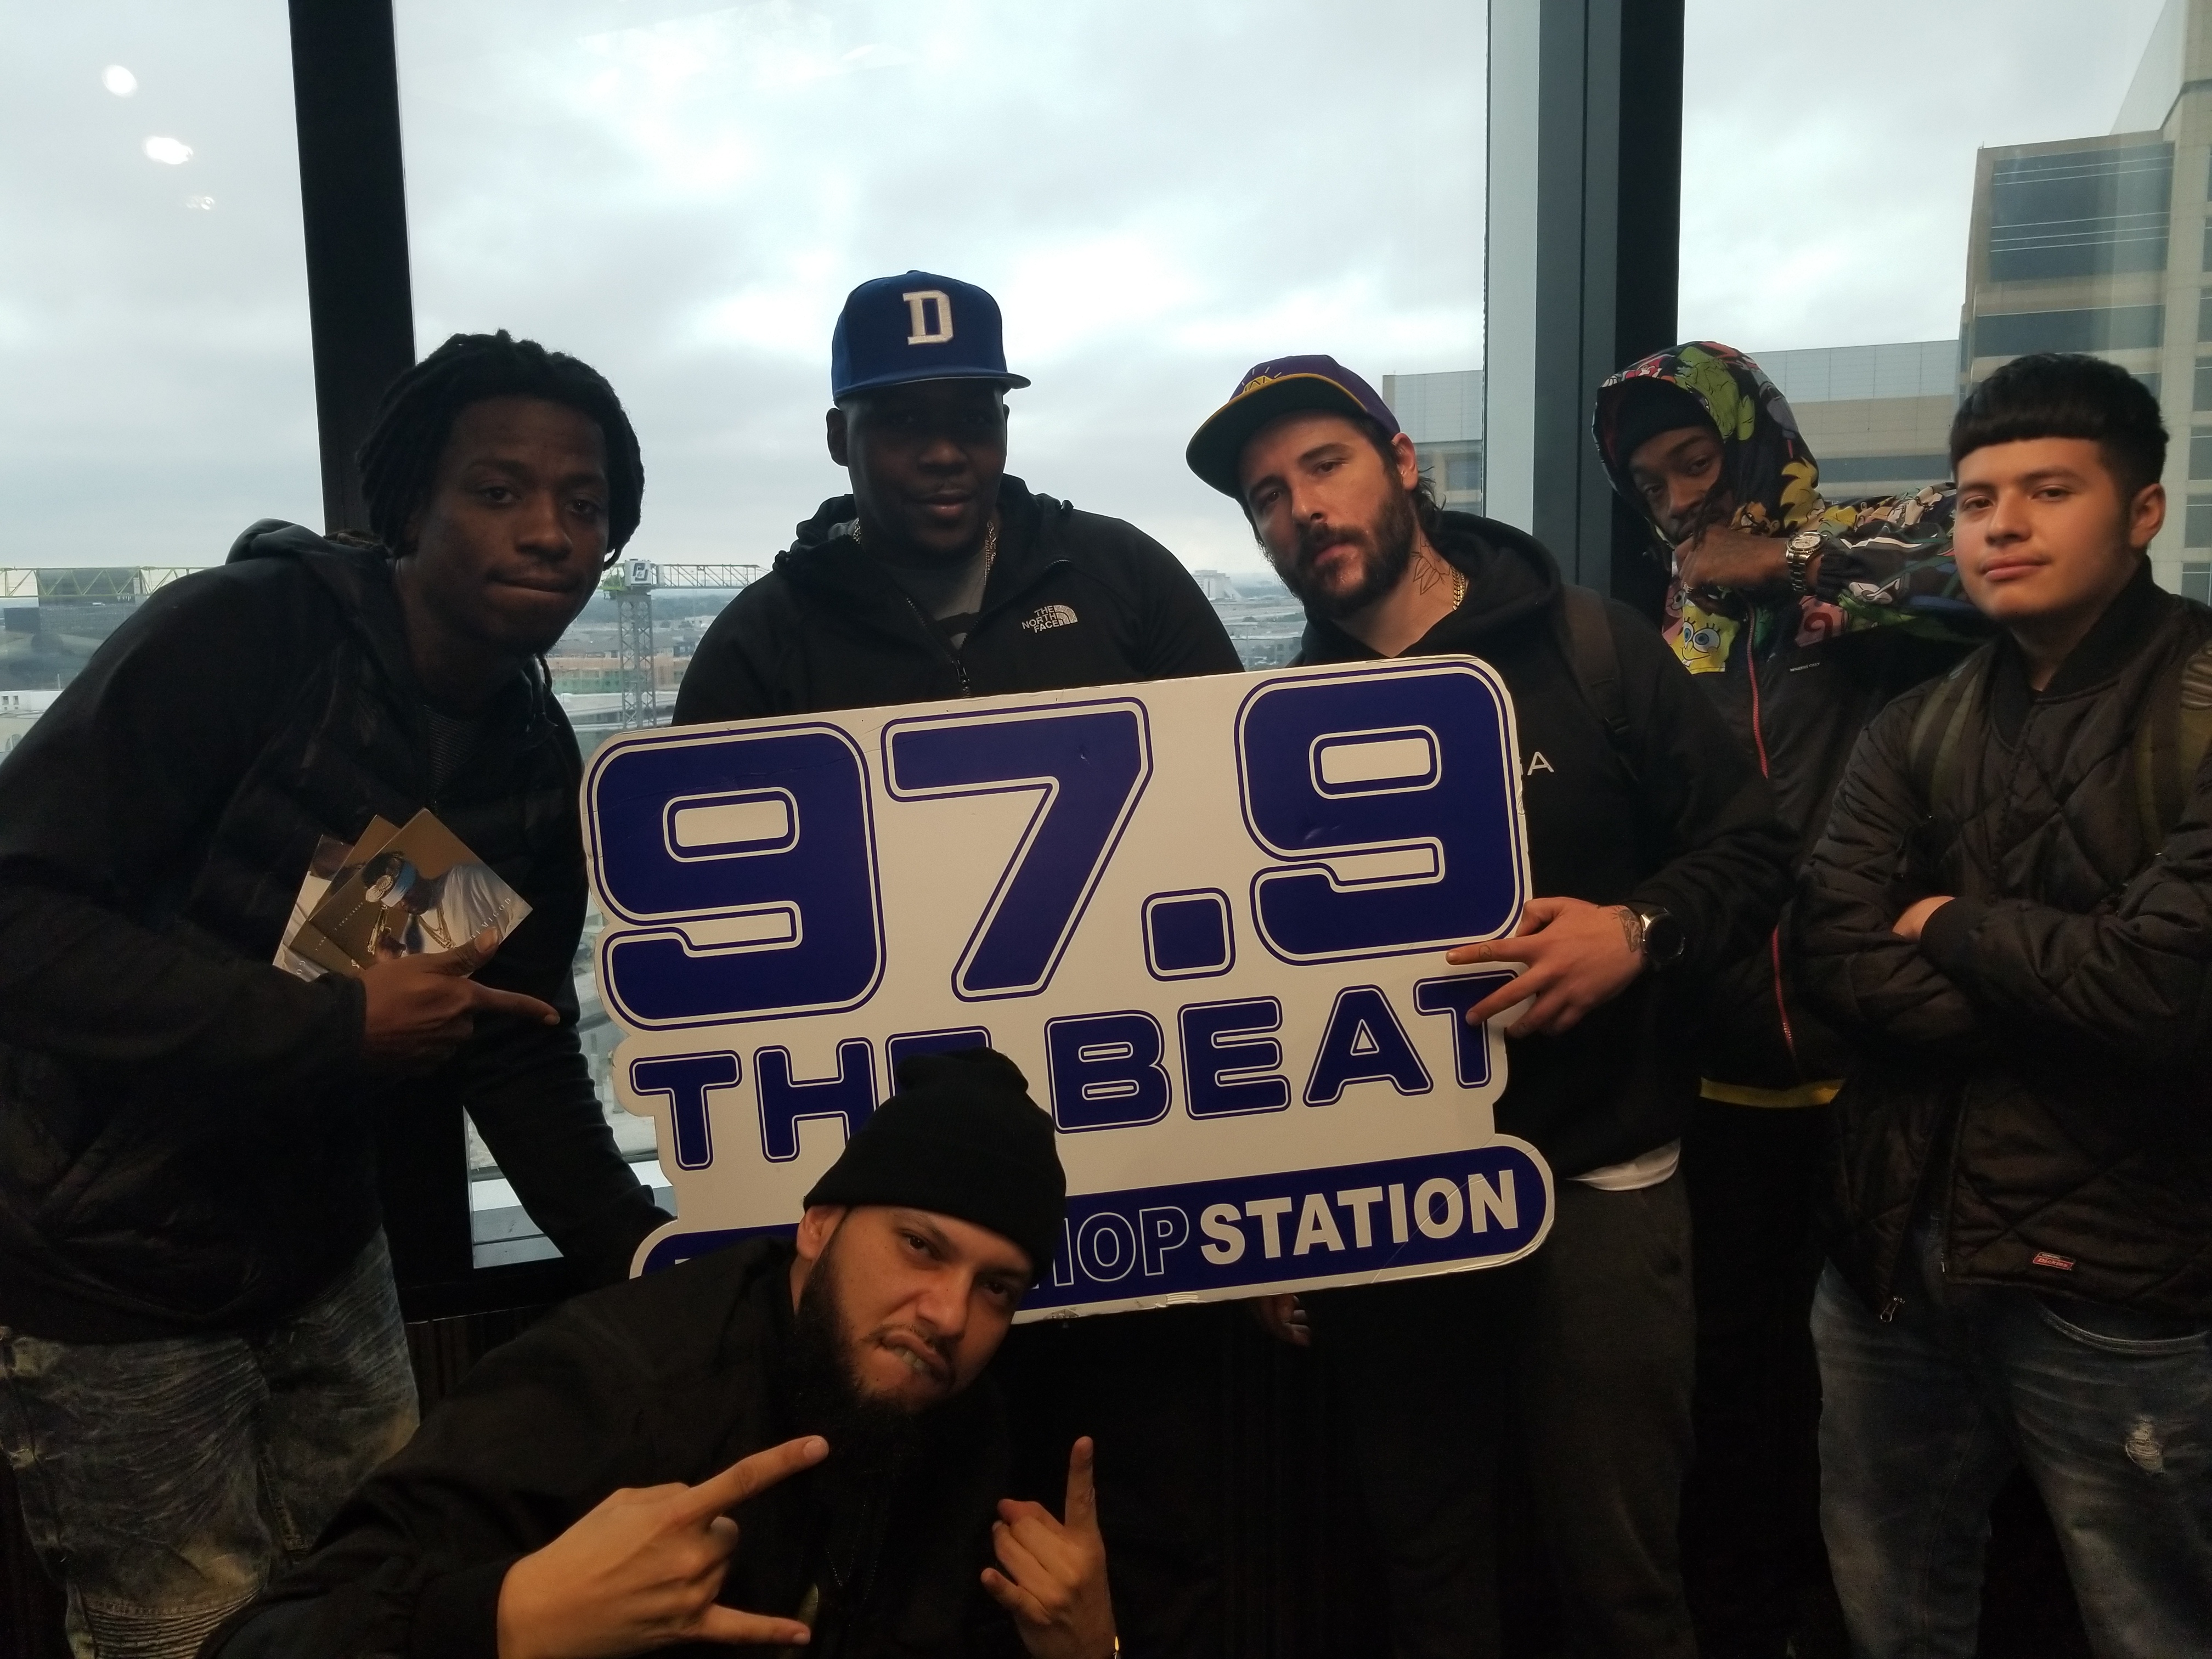 7 Tha Great Stops by 97.9 The Beat